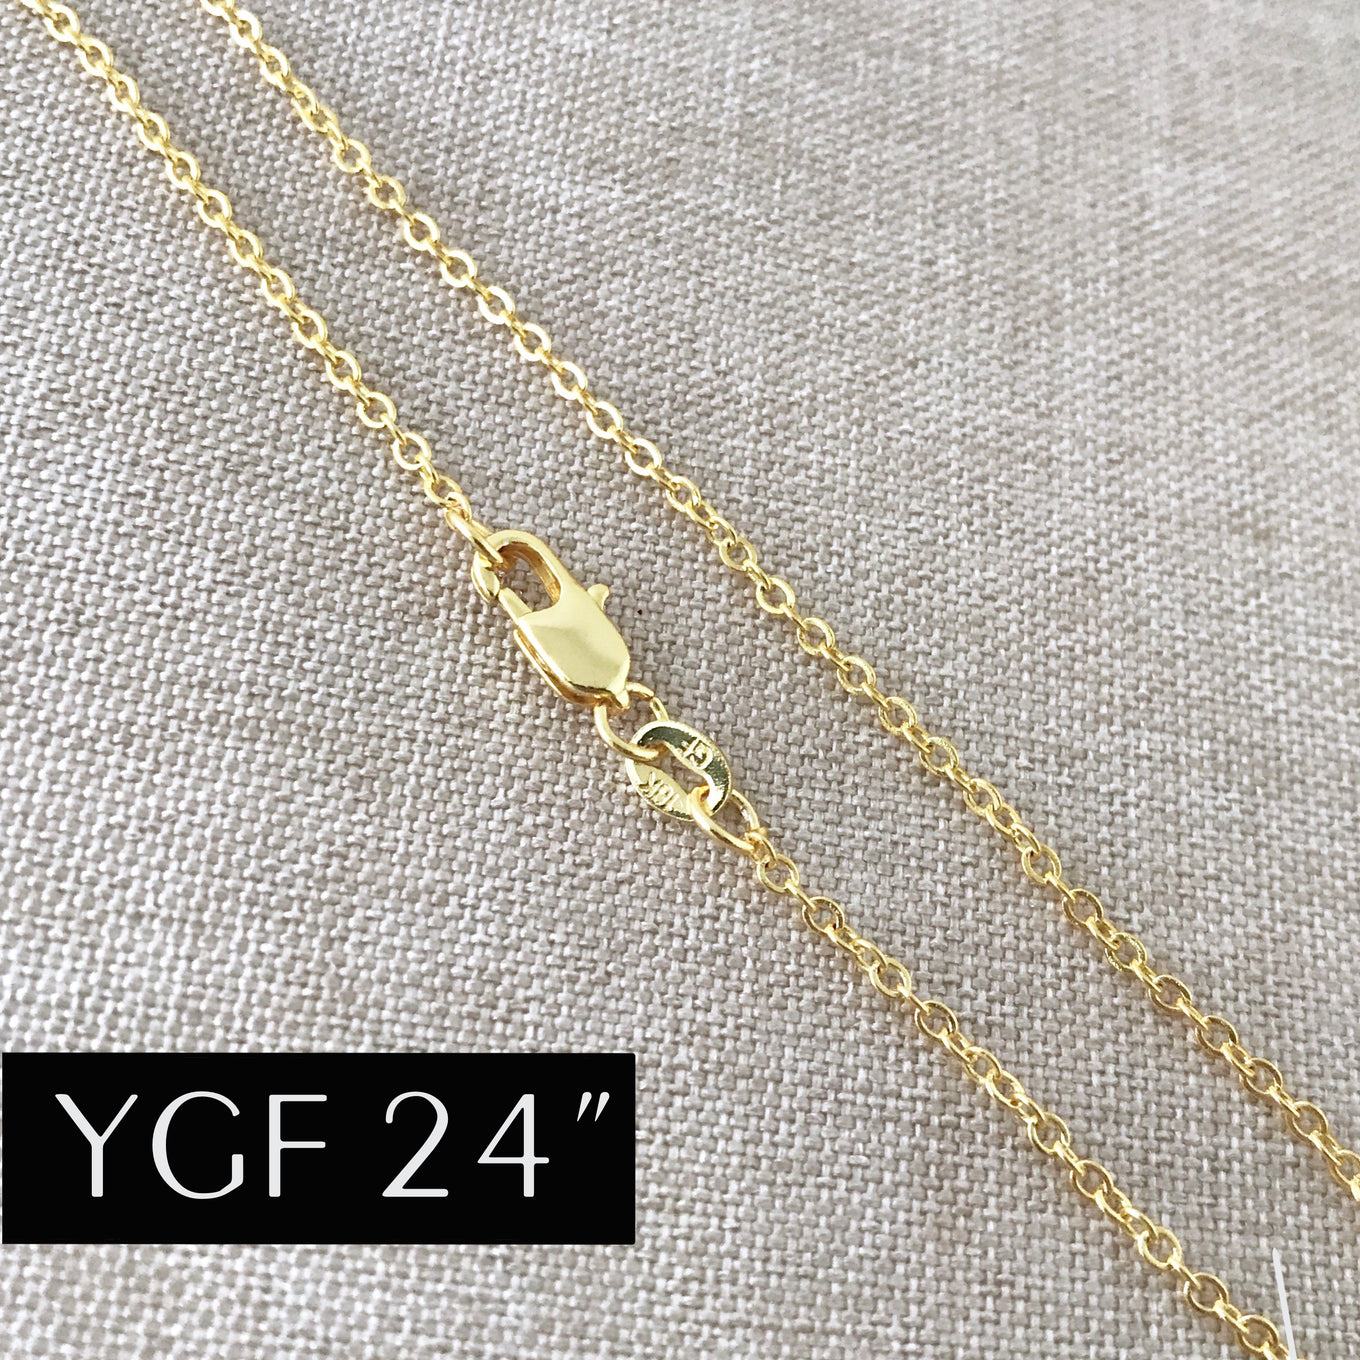 24 - 18kt Yellow Gold Filled Chain - Dainty Fine - 24 - 24 inch Necklace - Lobster Claw Clasp - 18 Karat KT YGF - Cable Chain